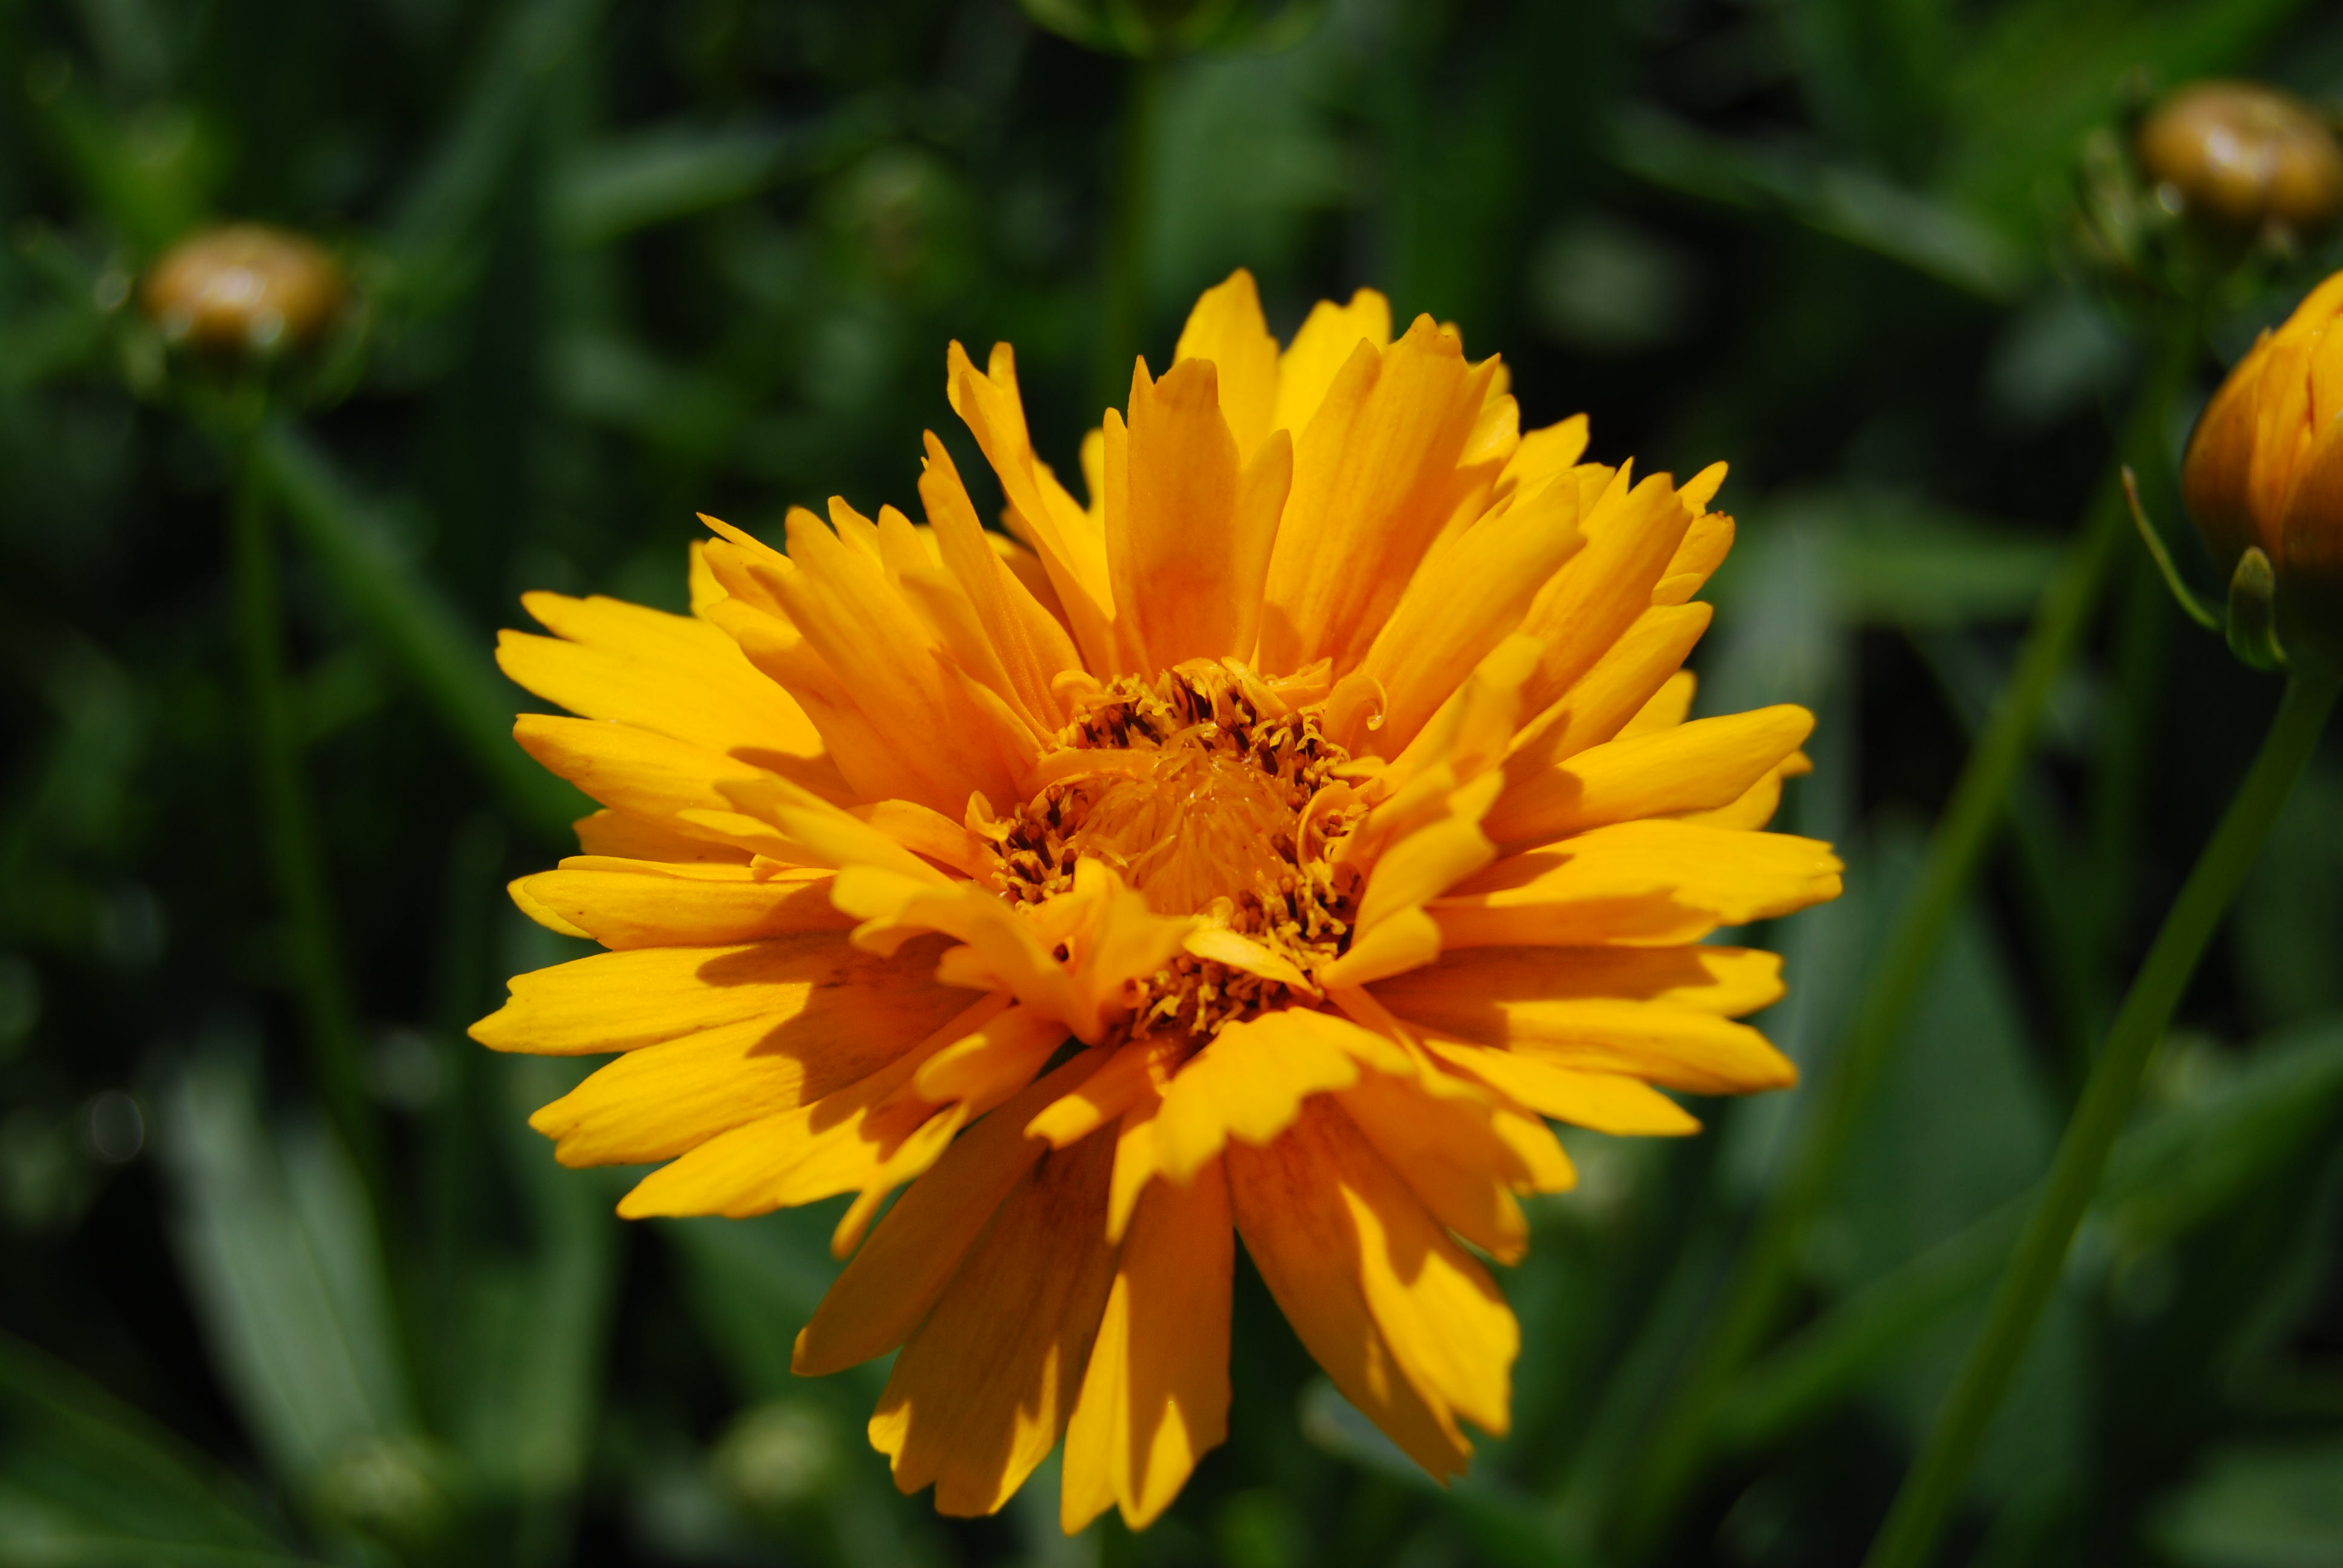 3.	Coreopsis, a low-maintenance perennial with a long bloom time and trouble-free nature, is a great addition to the garden.